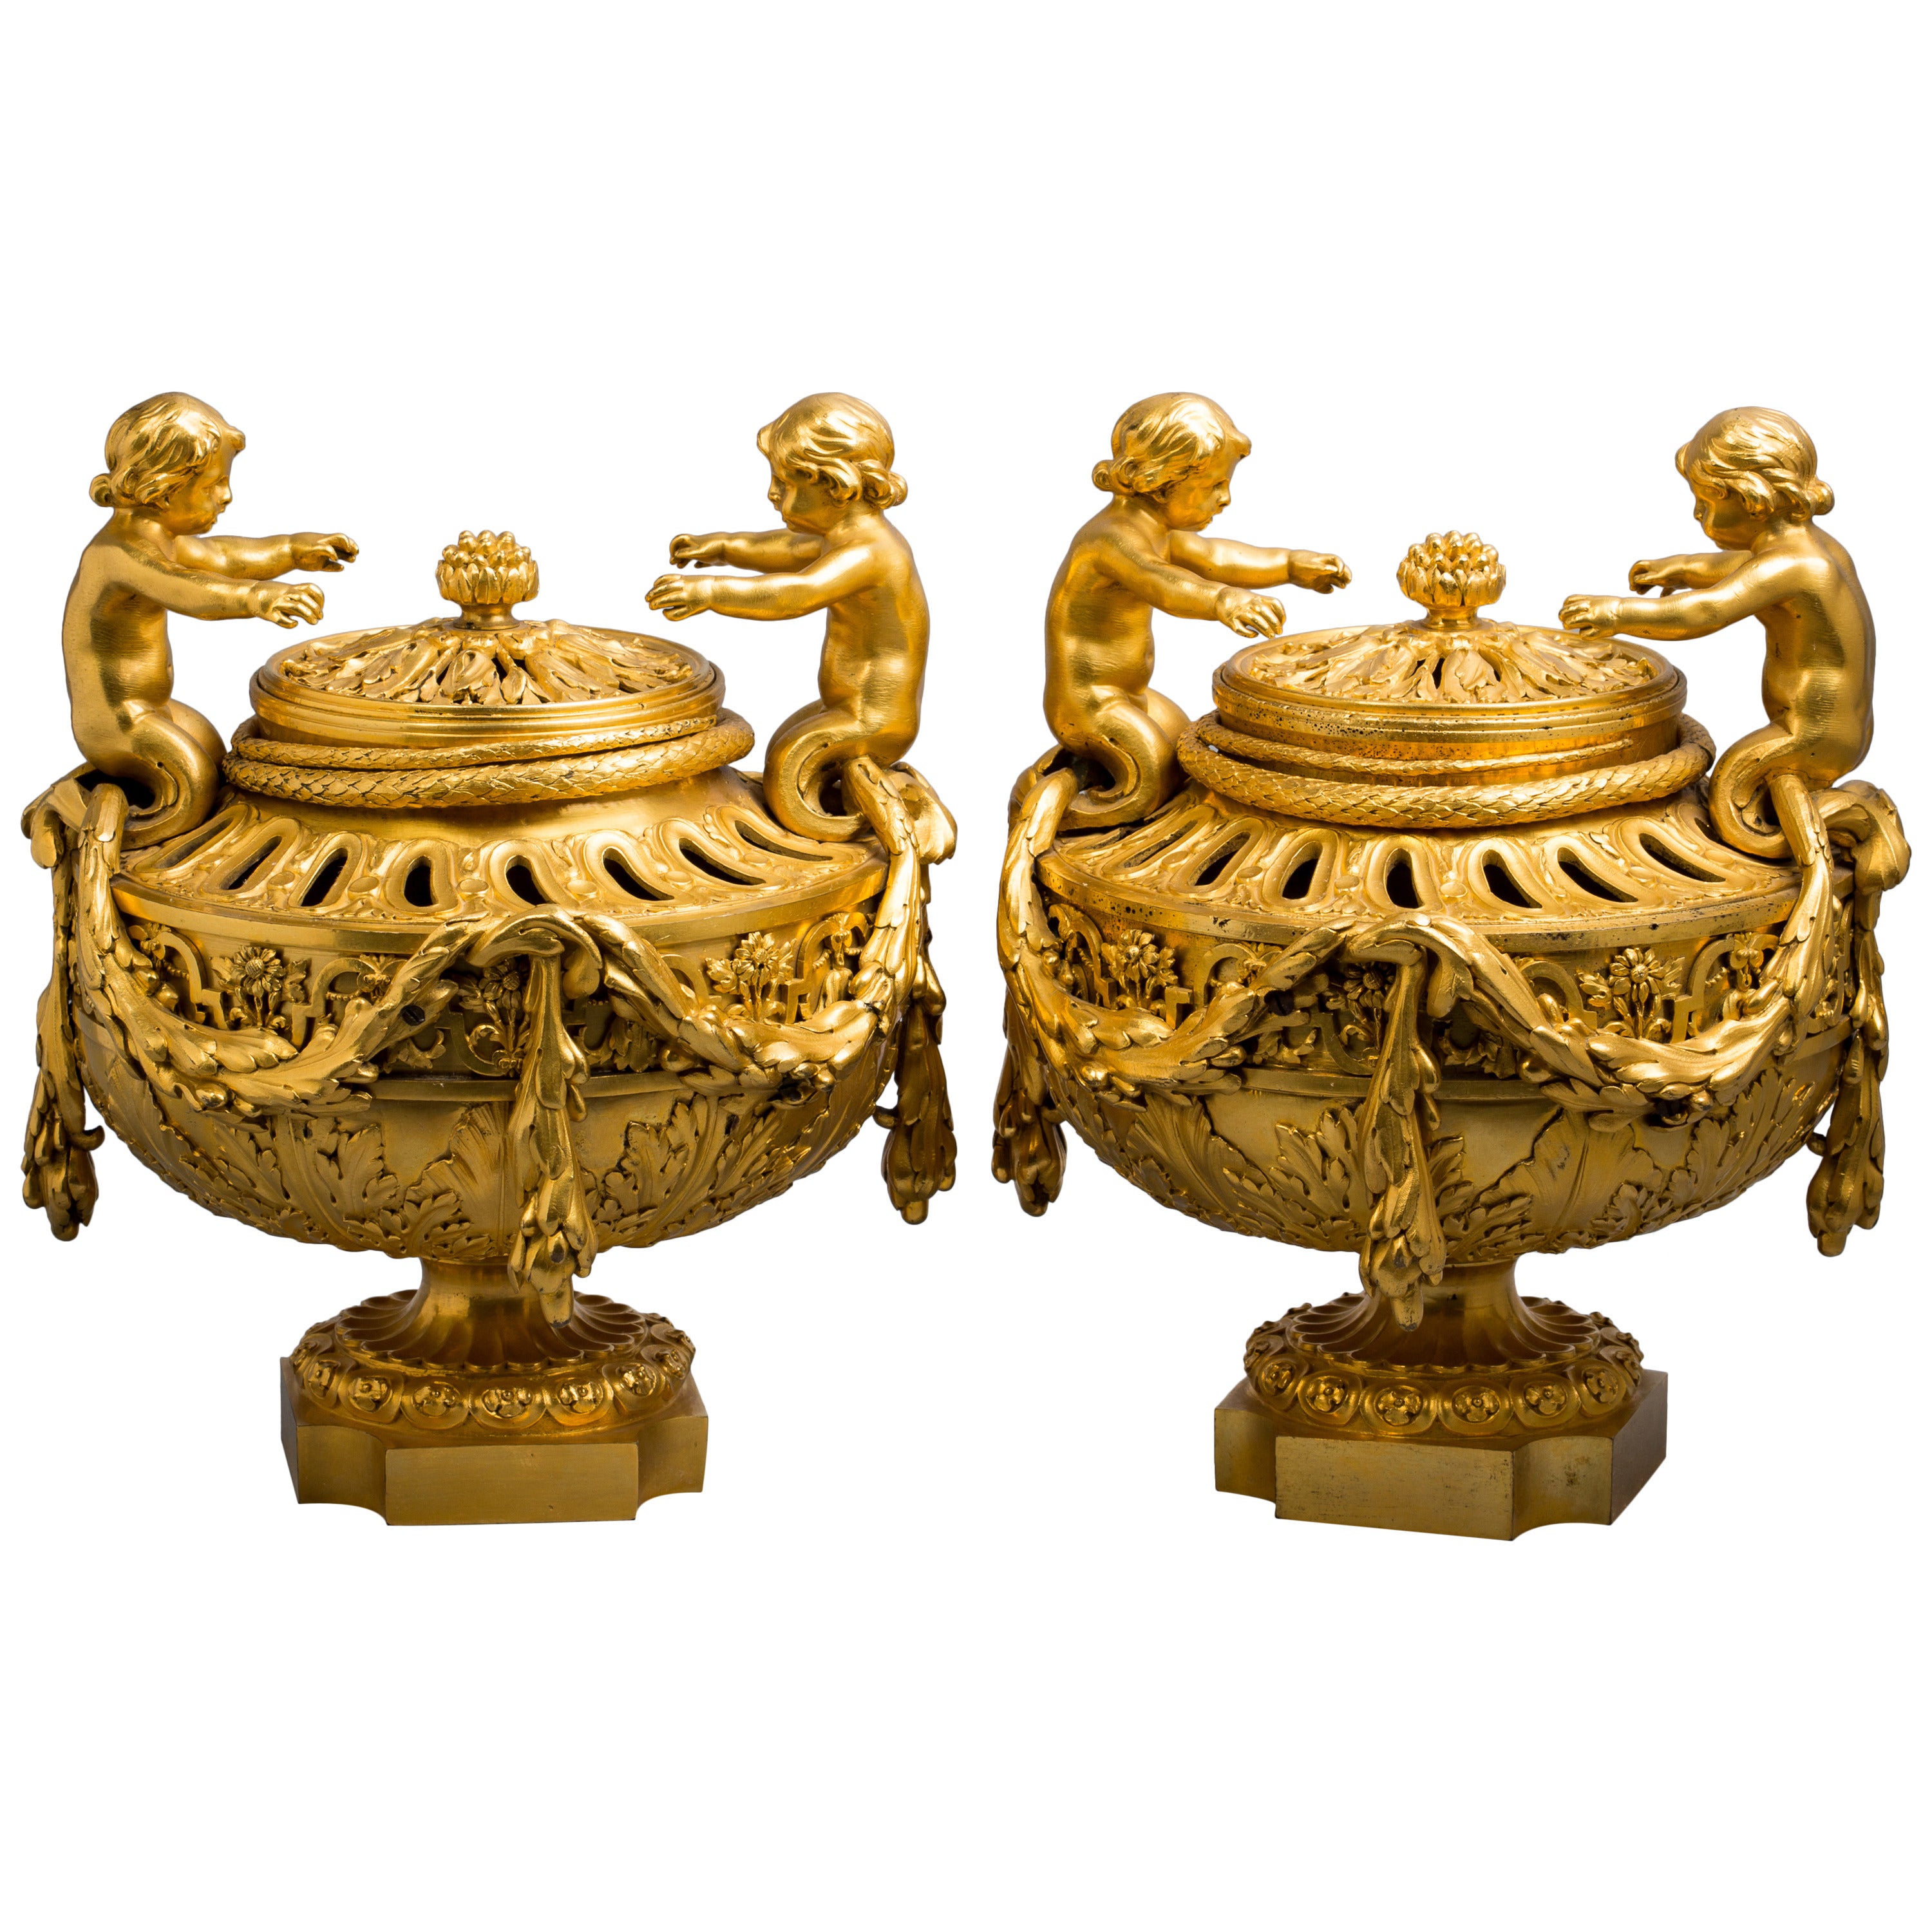 Pair of French Bronze Covered Potpourri Urns, circa 1840